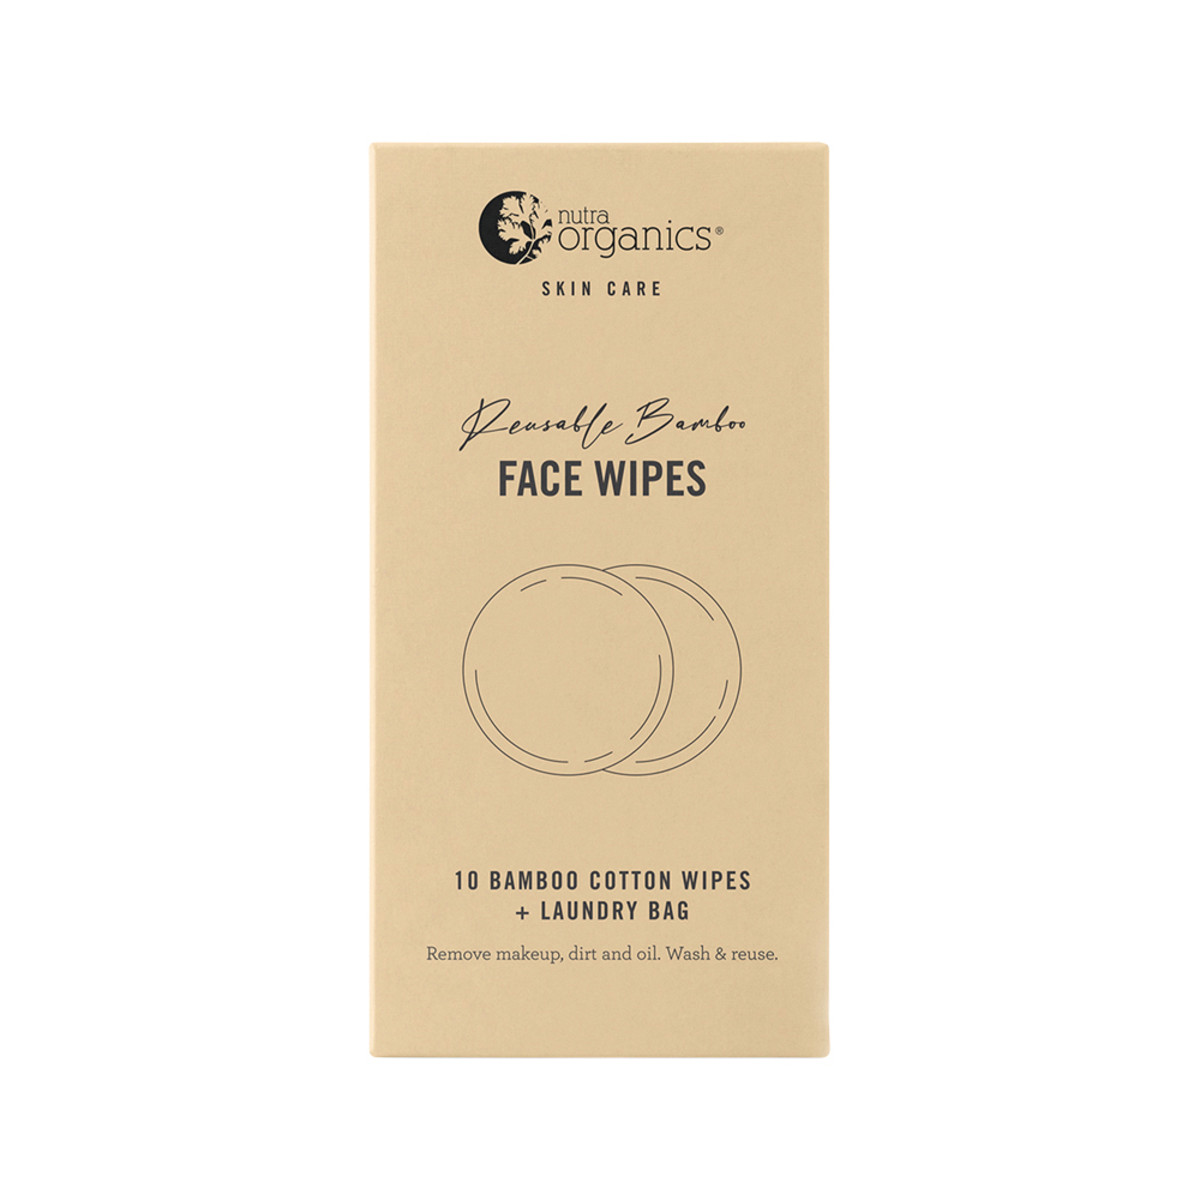 Nutra Organics Reusable Bamboo Face Wipes x 10 Pack